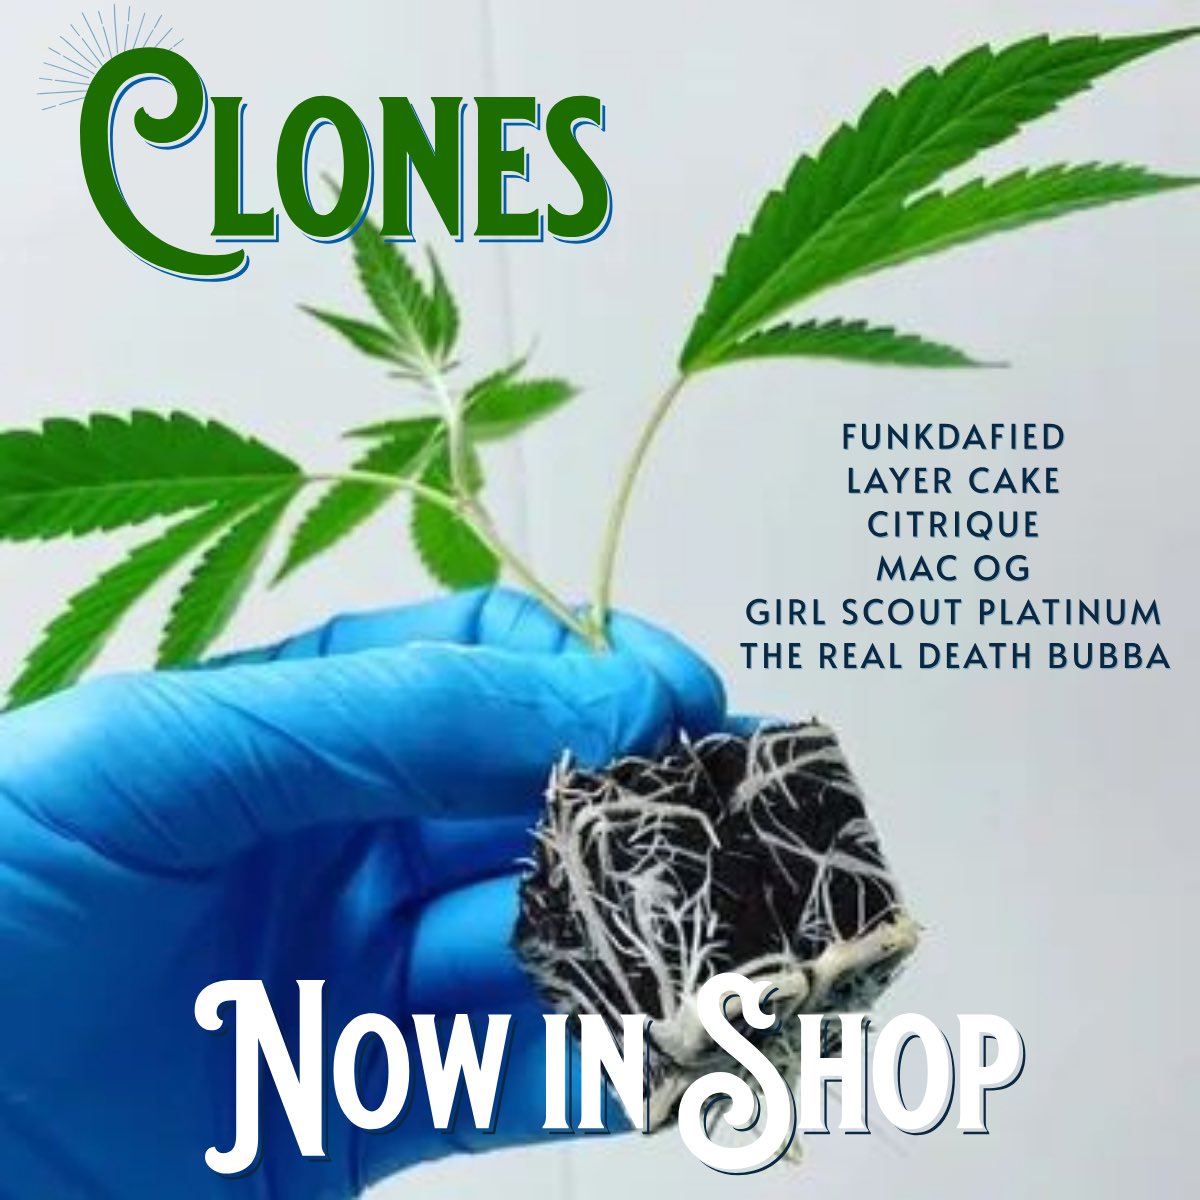 Clones from Nanoose now available at Oceanside CWeed in Parksville.